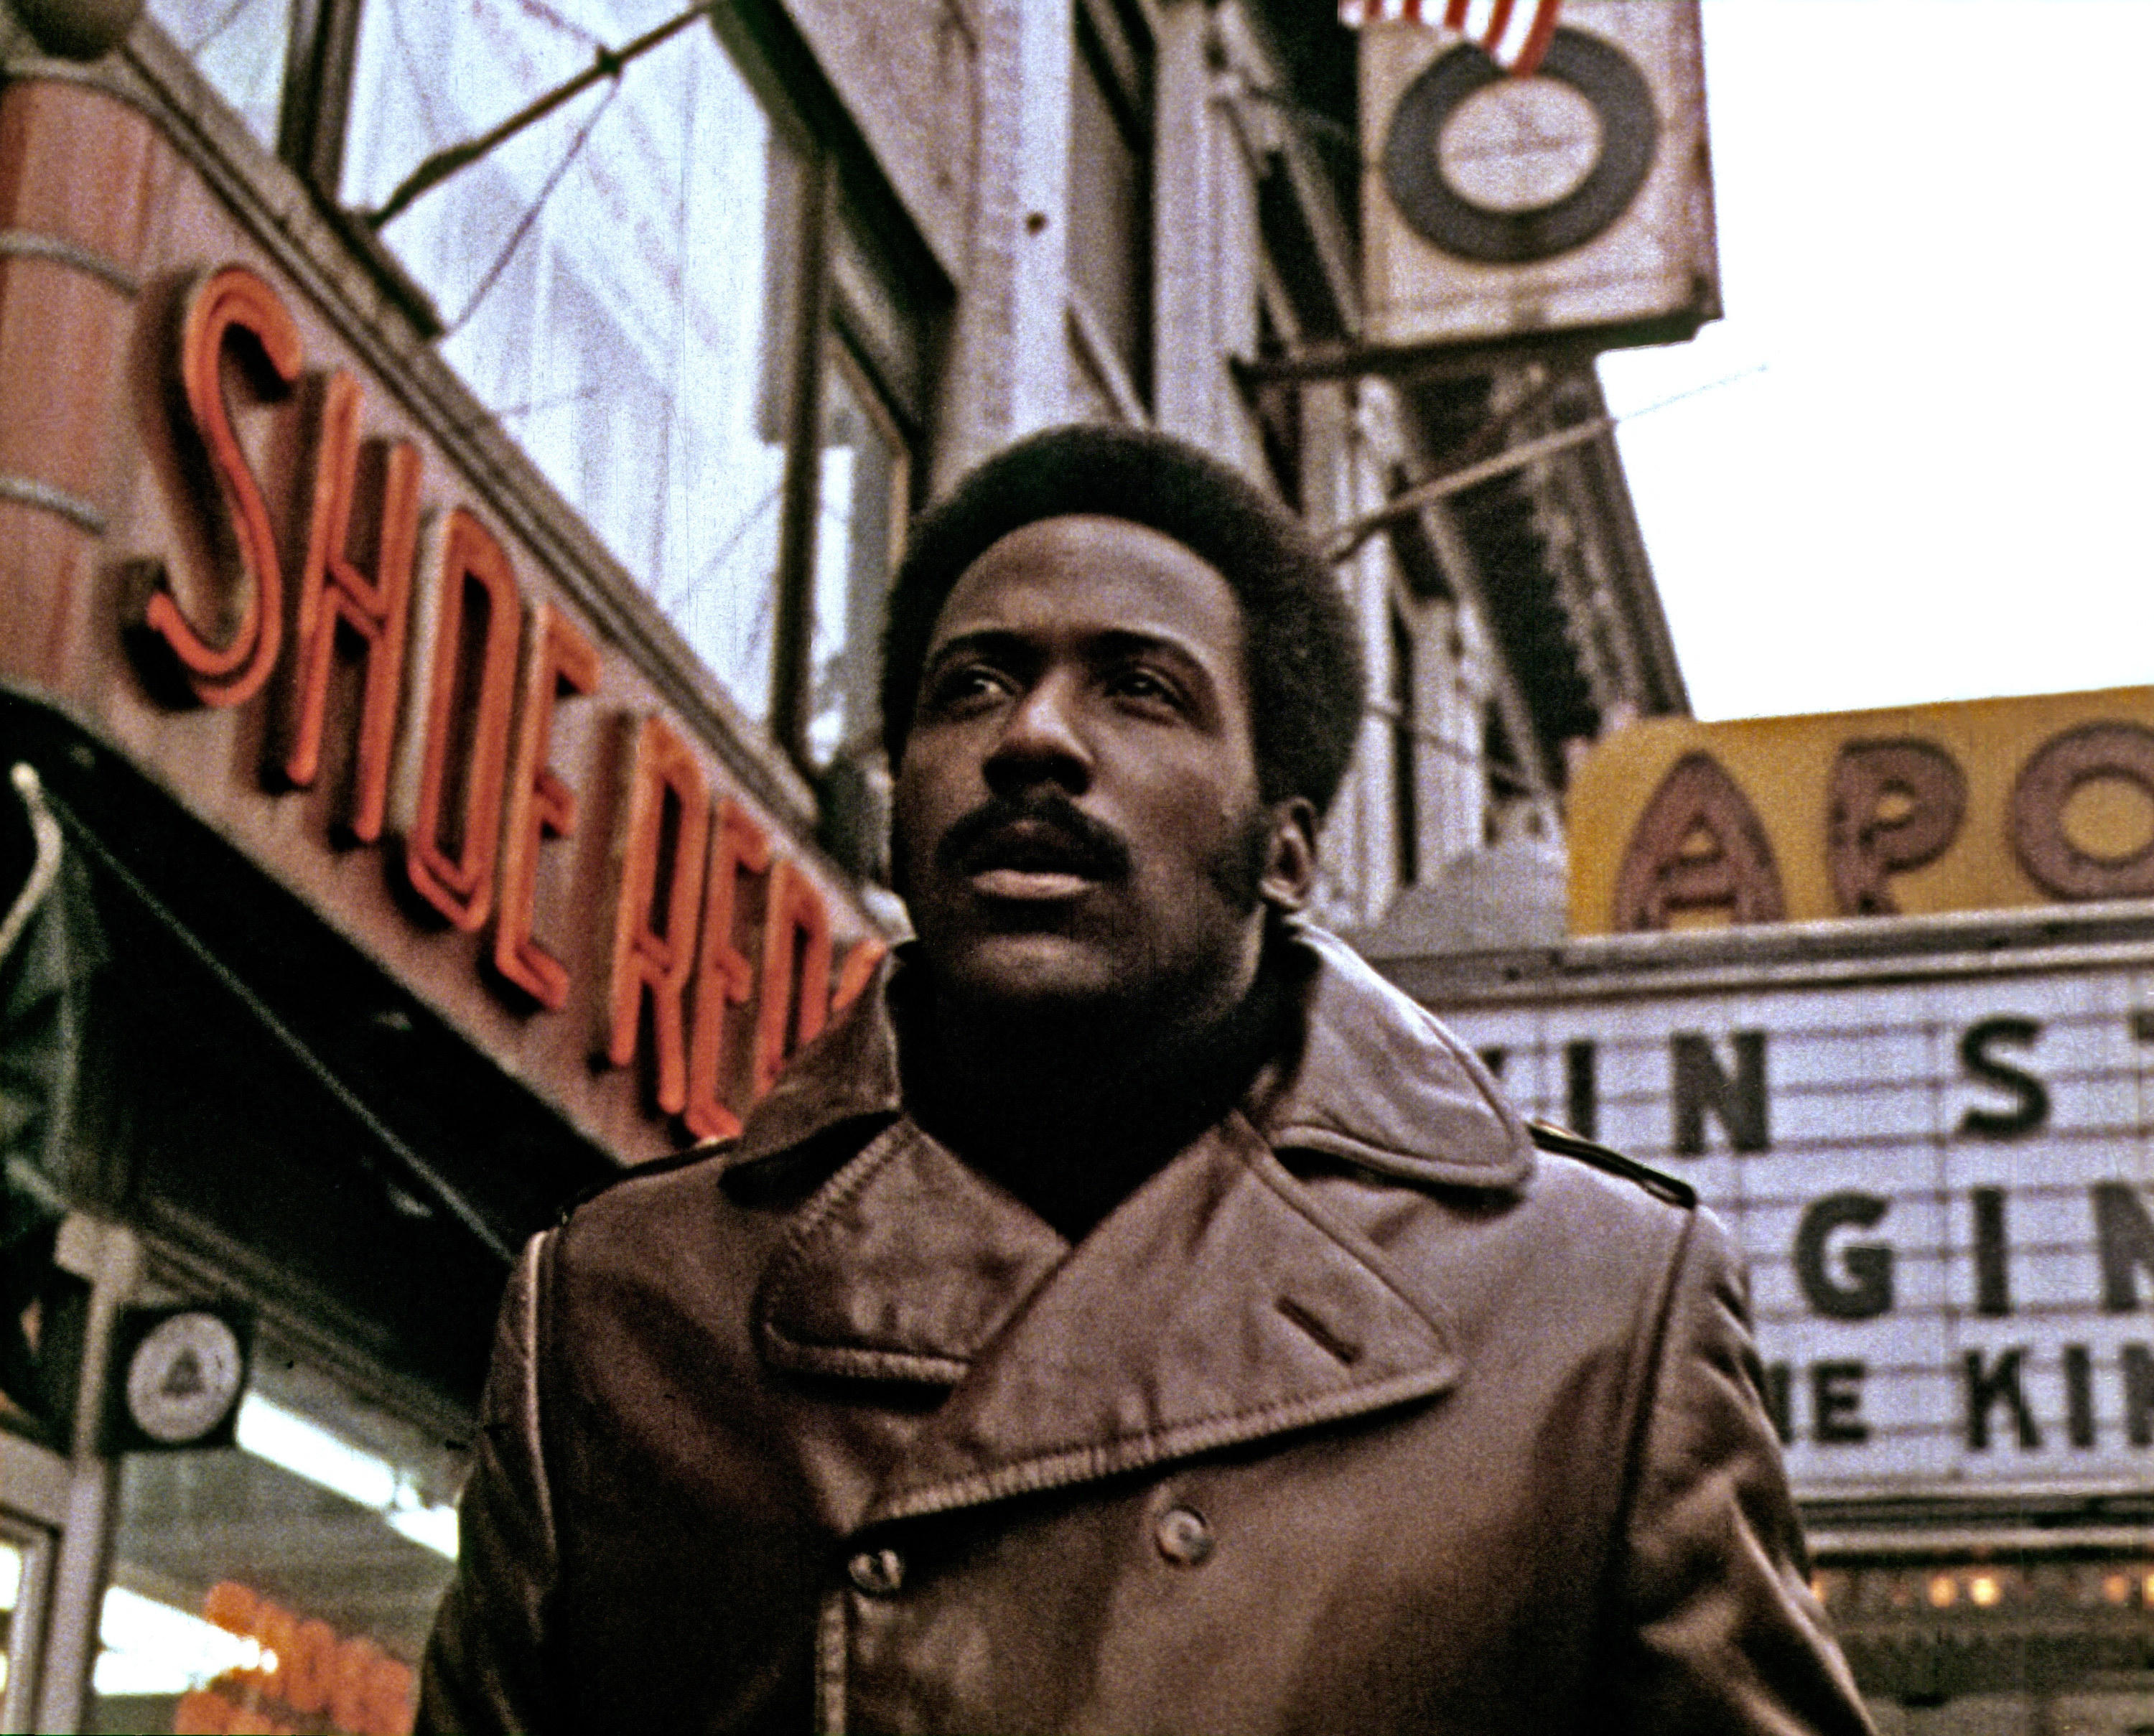 Richard Roundtree with a mustache and leather coat walking down 42nd Street